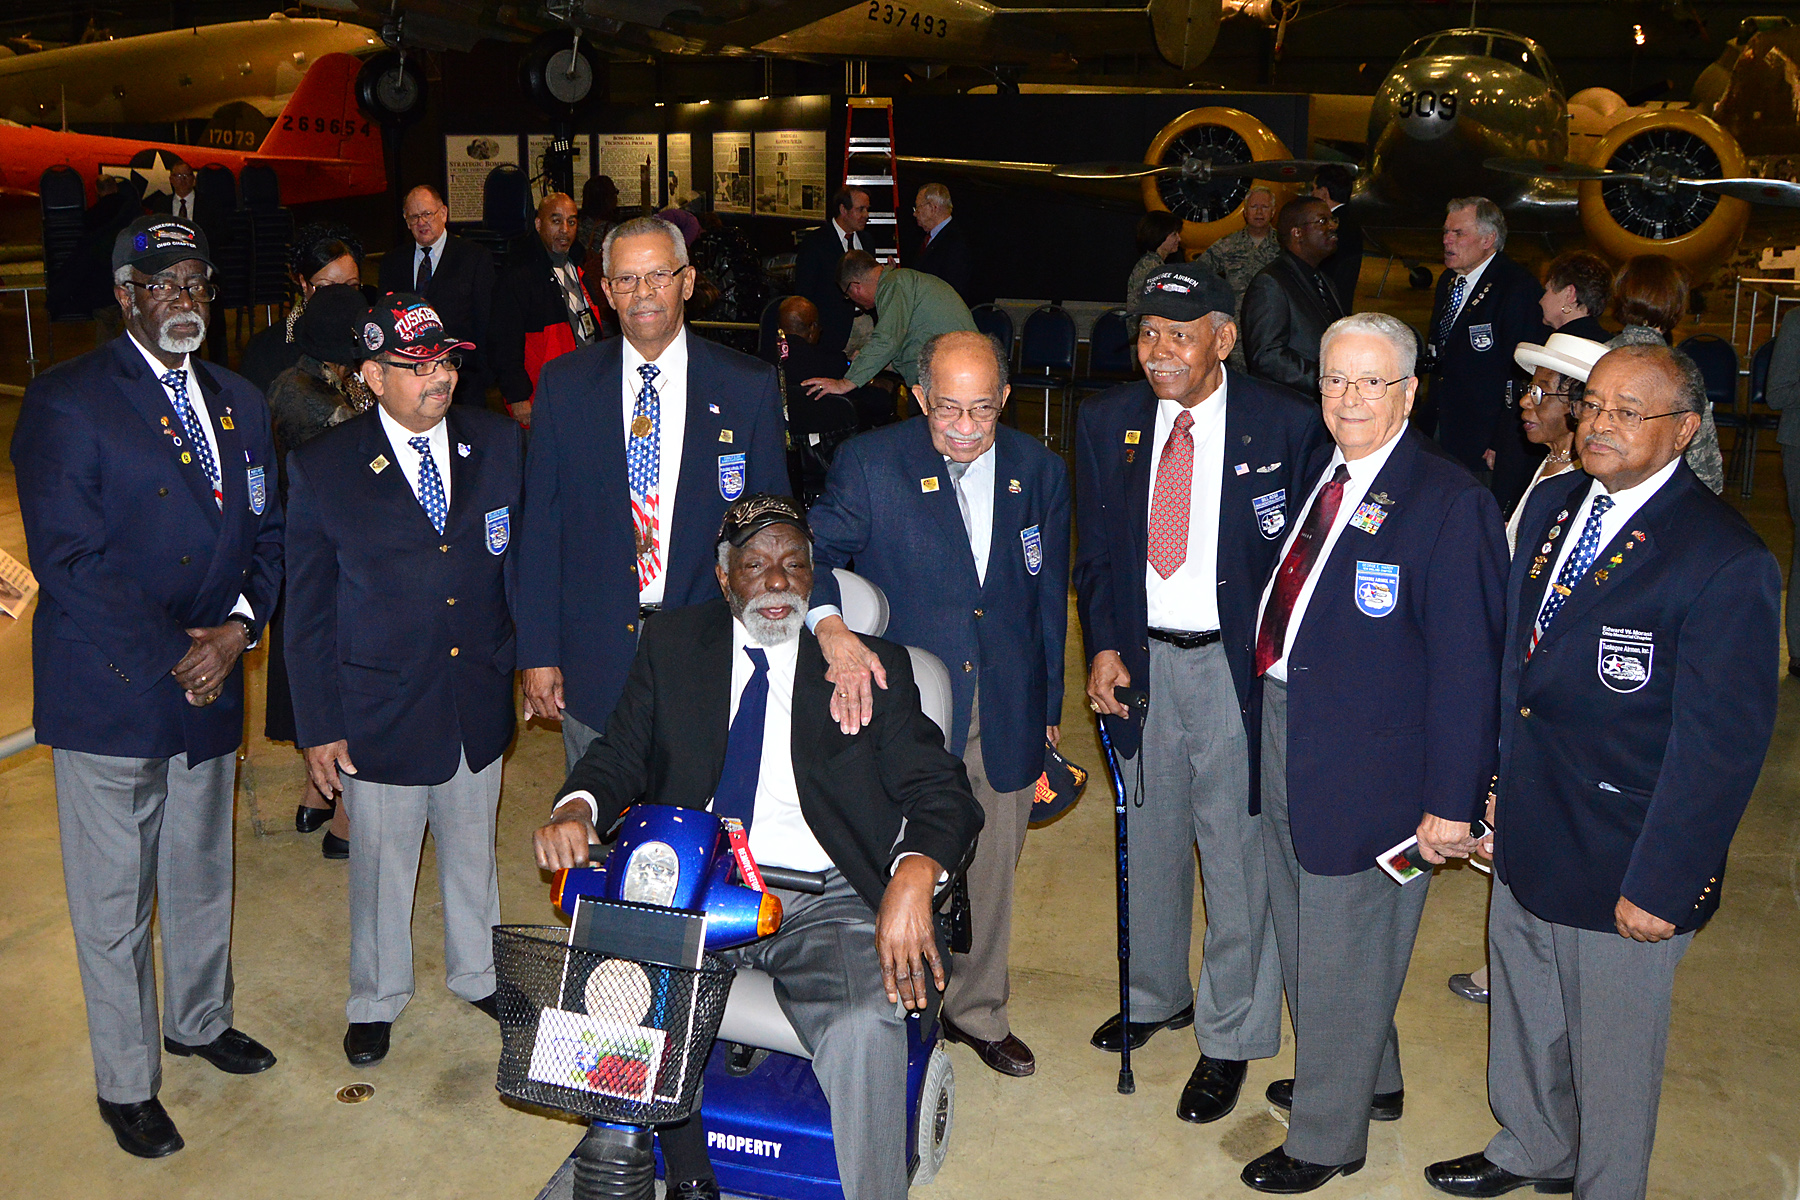 Tuskegee Airmen and Honorary Tuskegee Airmen gathered for photographs at the expanded Tuskegee Airmen exhibit opening in the WWII Gallery at the National Museum of the U.S. Air Force on Feb. 10, 2015. (U.S. Air Force photo) 